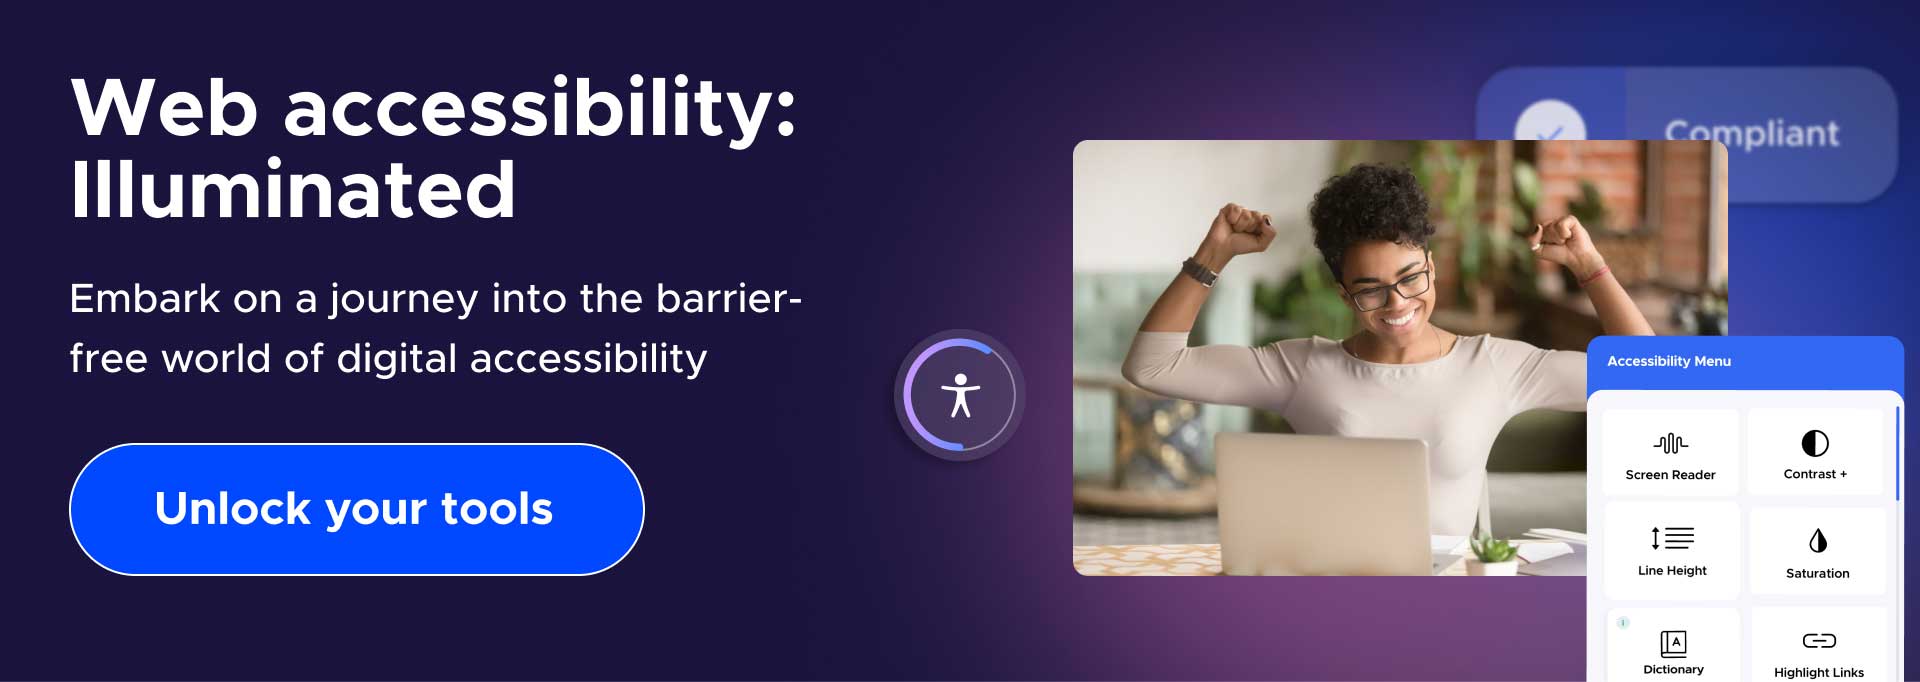 Embark on a journey into the barrier-free world of digital accessibility